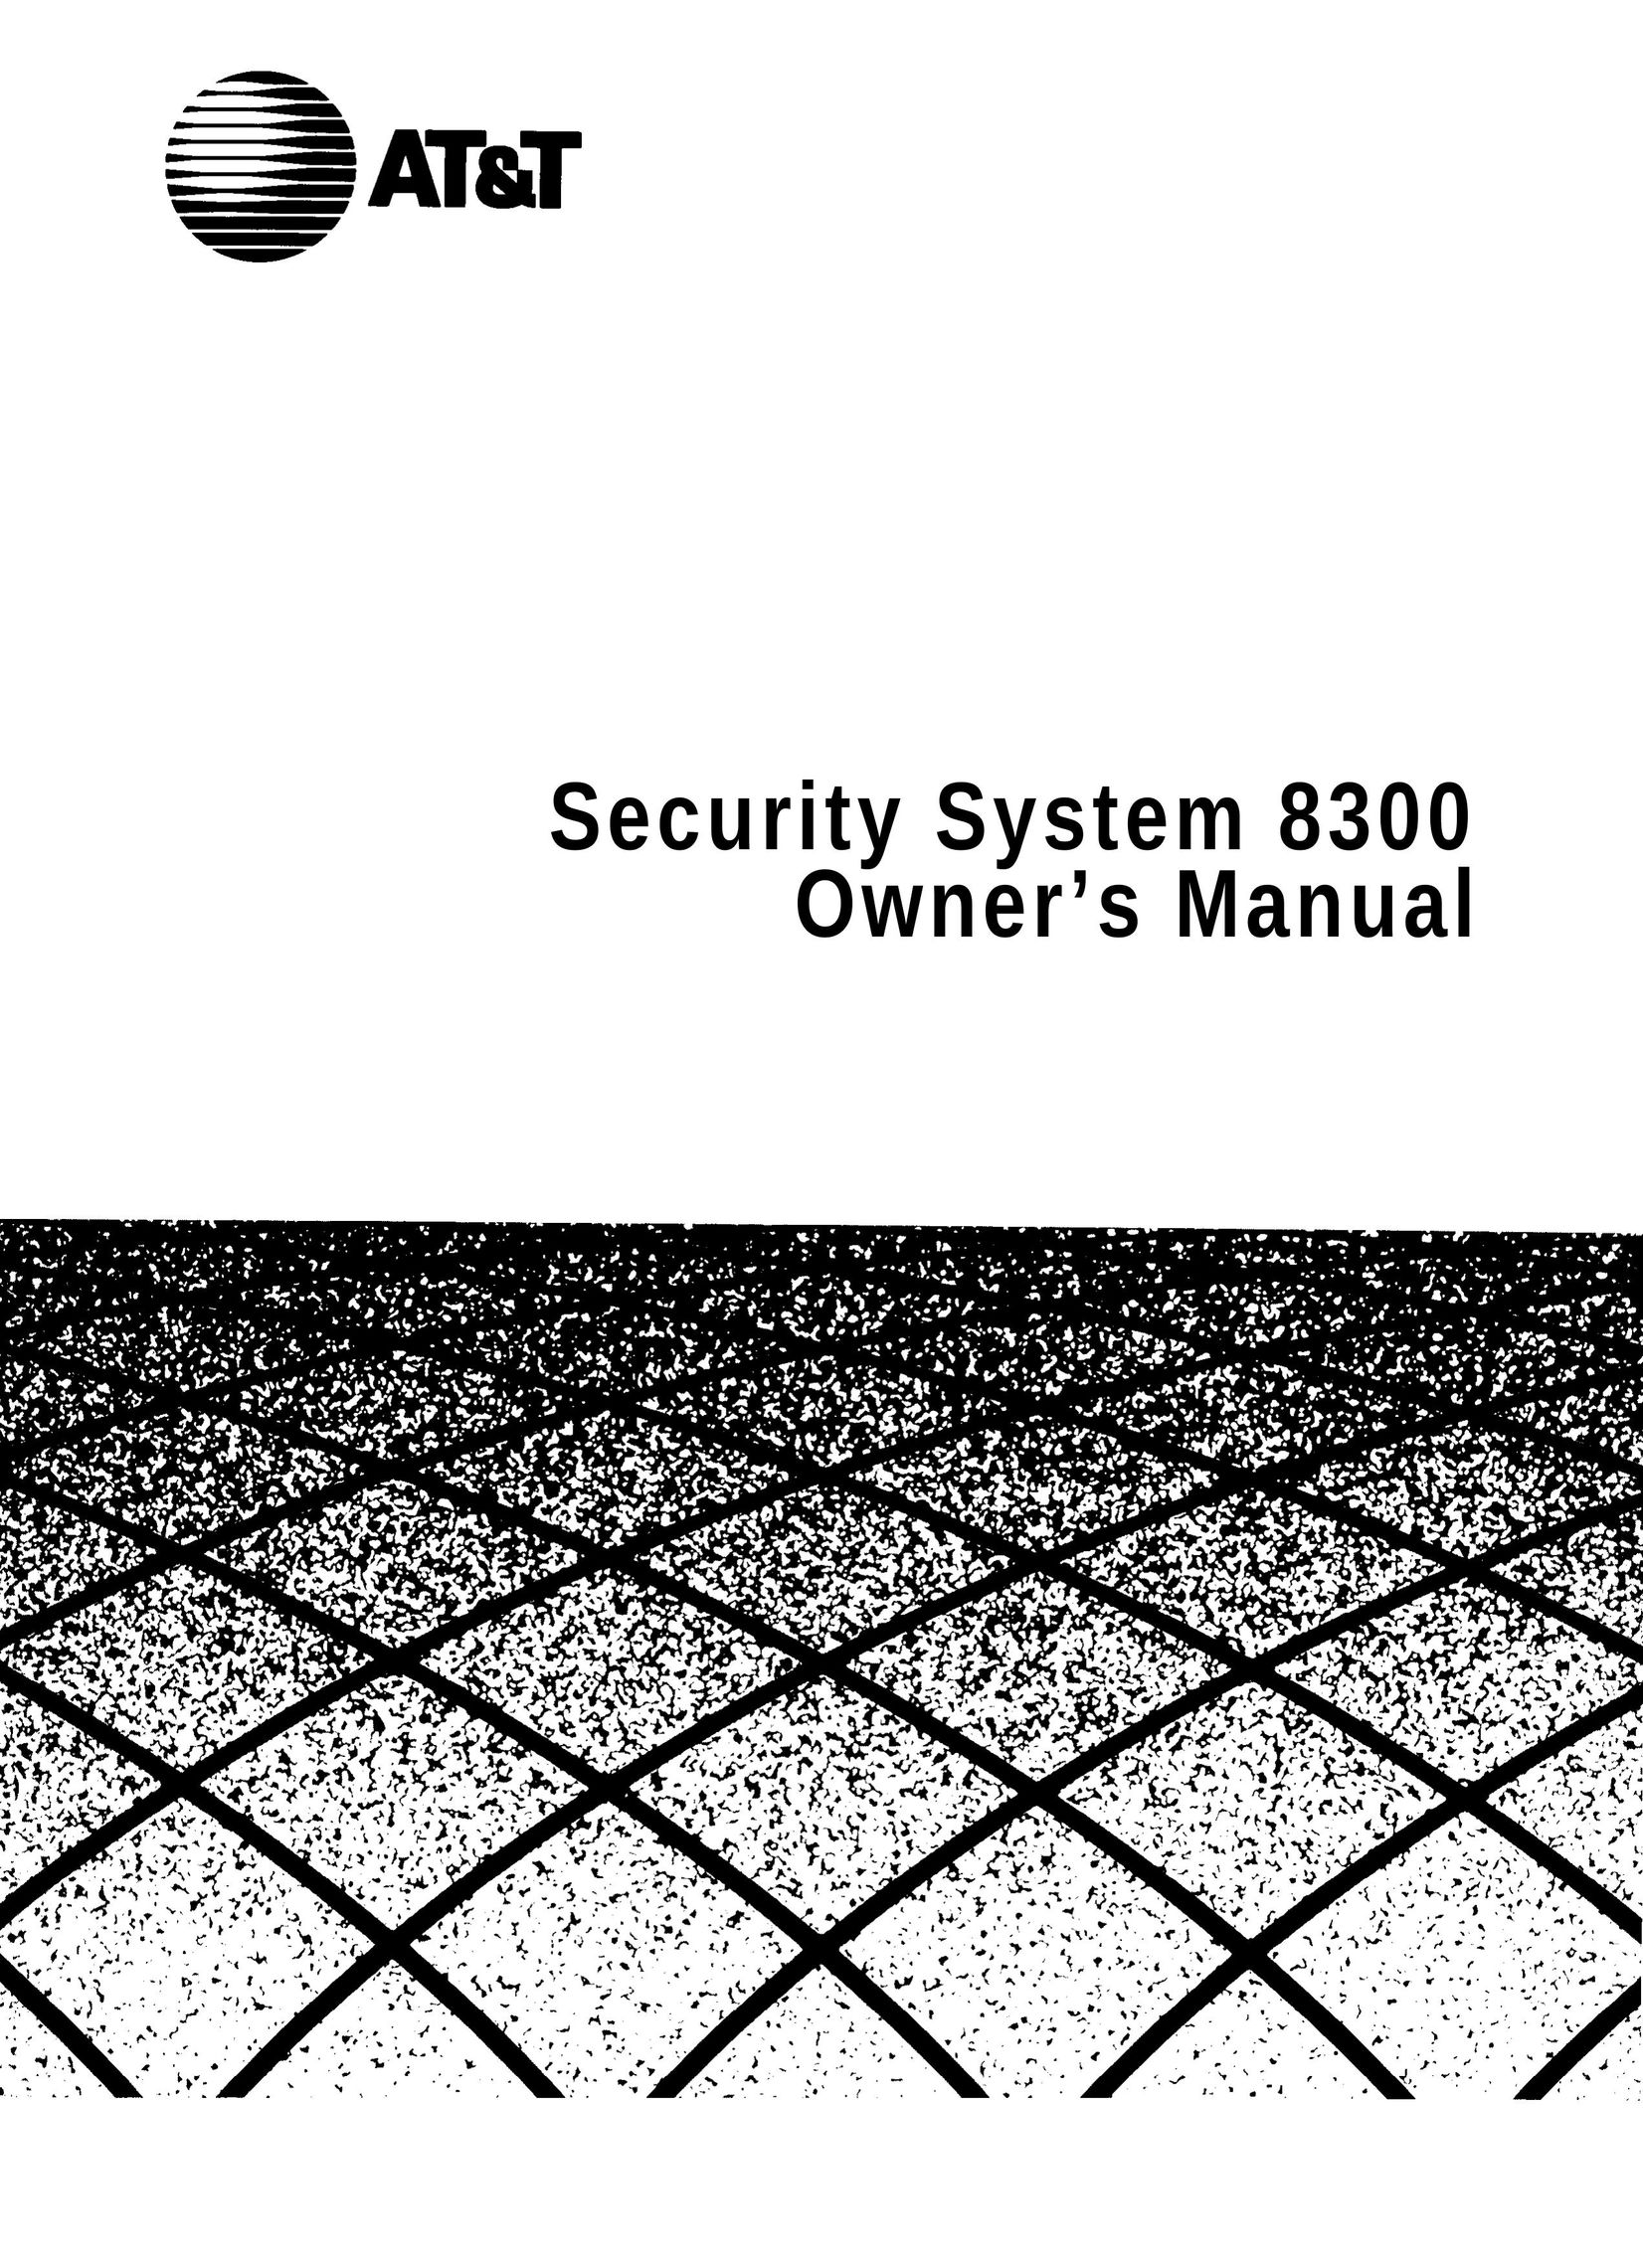 AT&T 8300 Home Security System User Manual